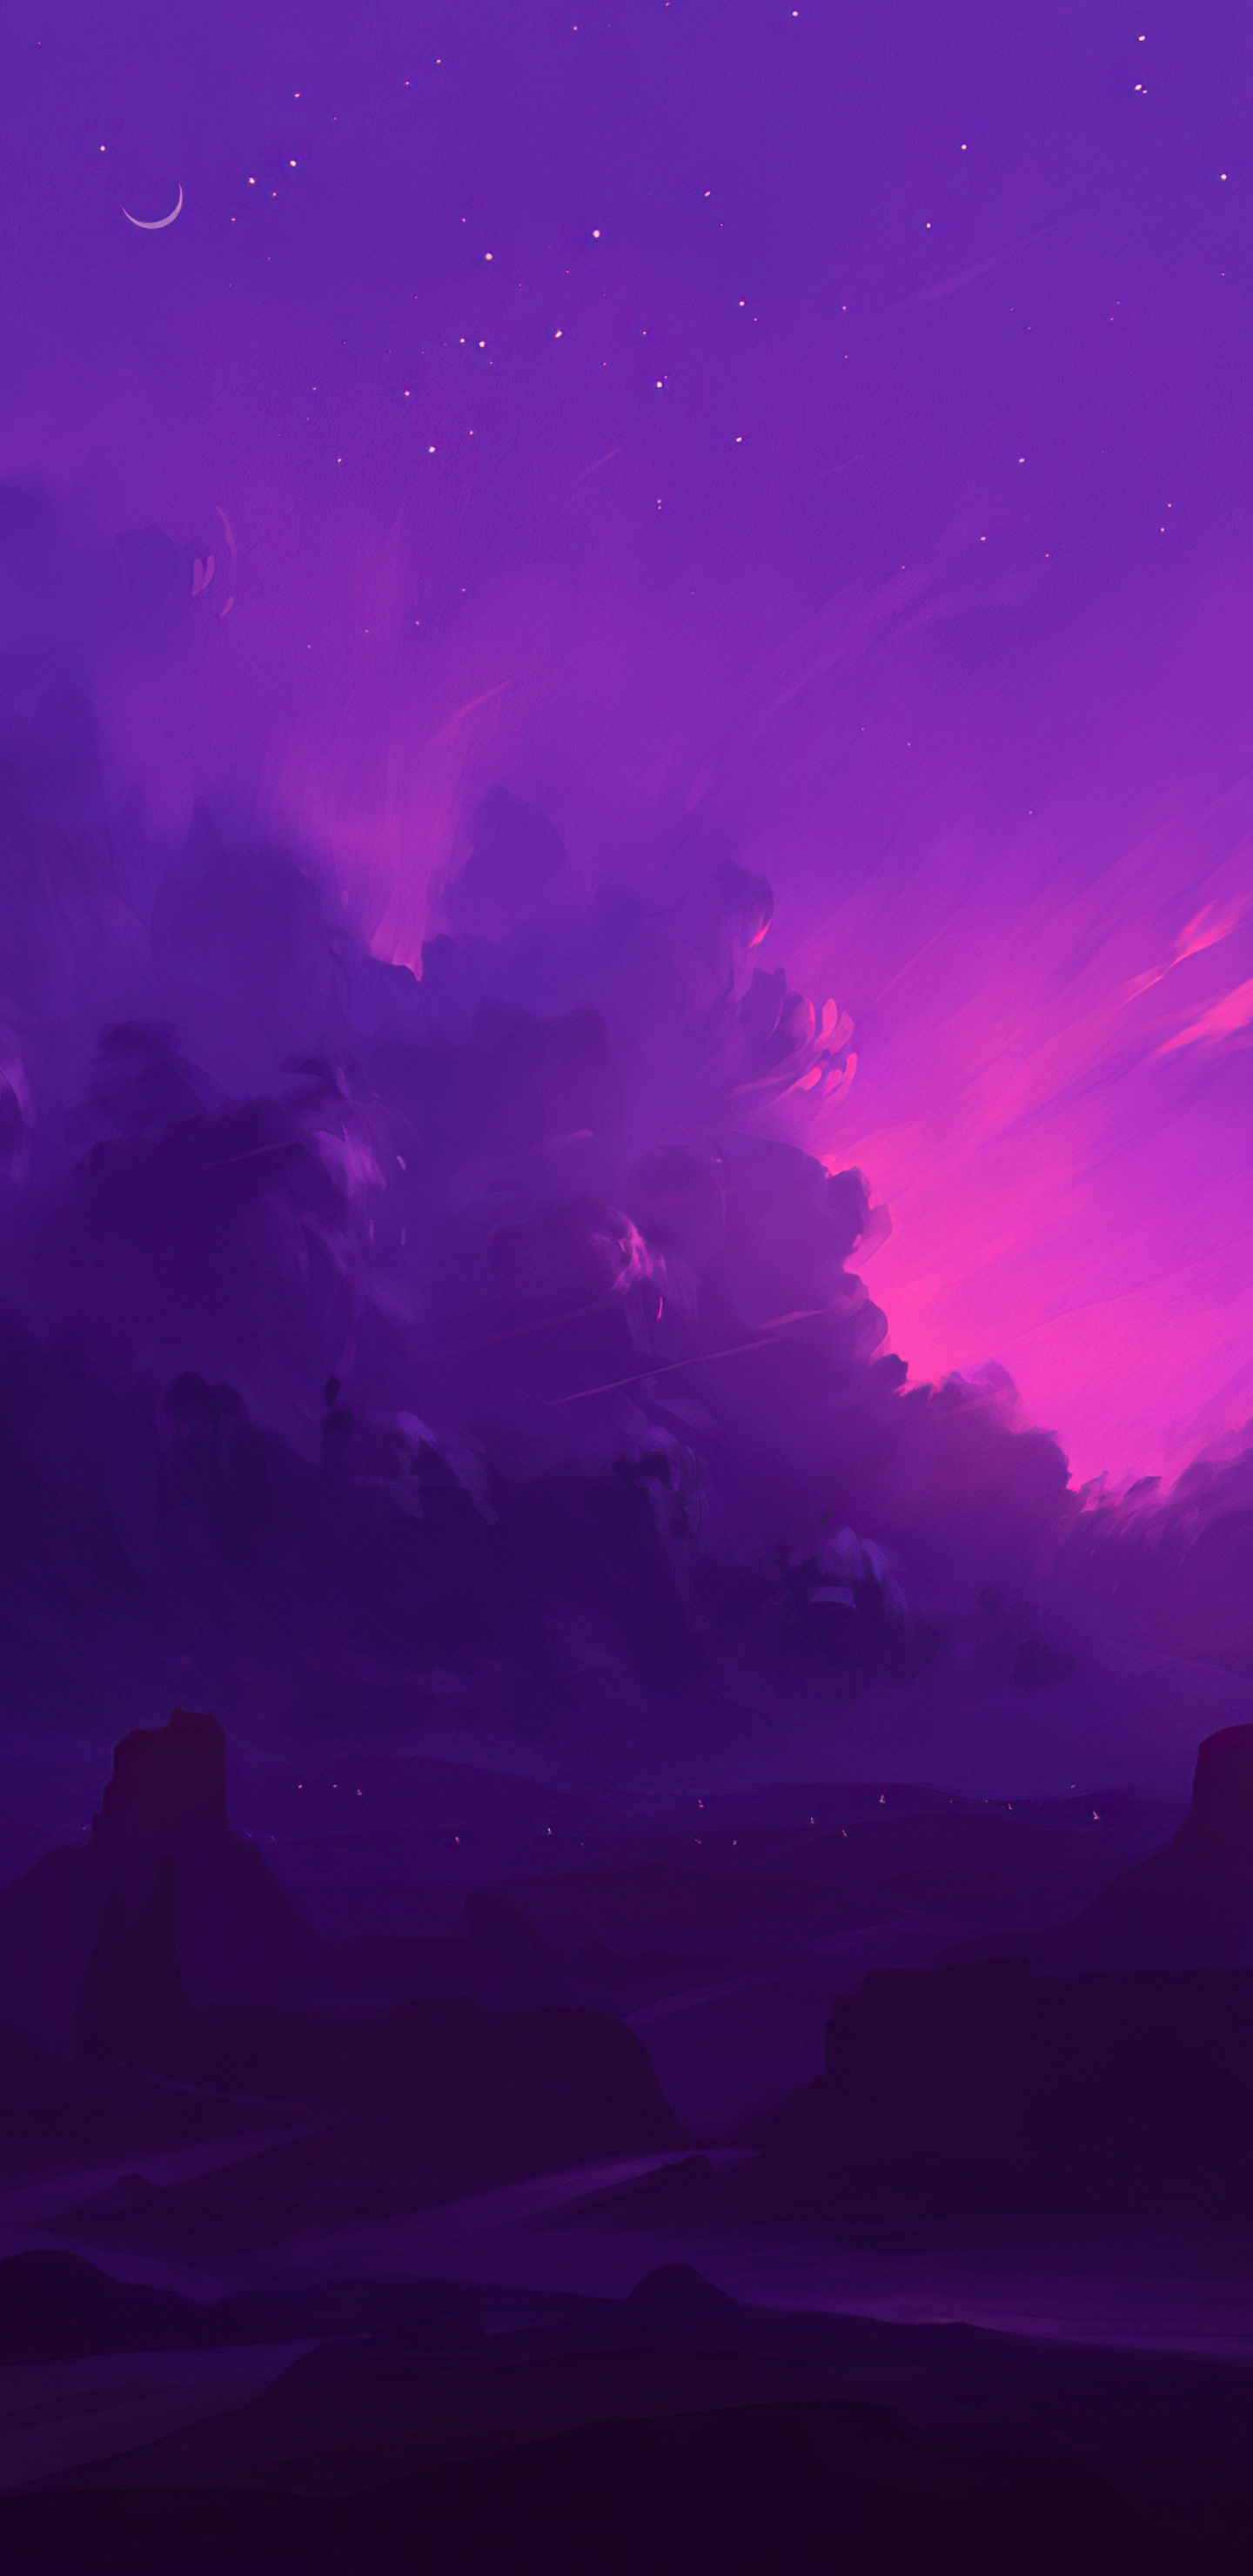 A purple sky with clouds and mountains - Hot pink, light pink